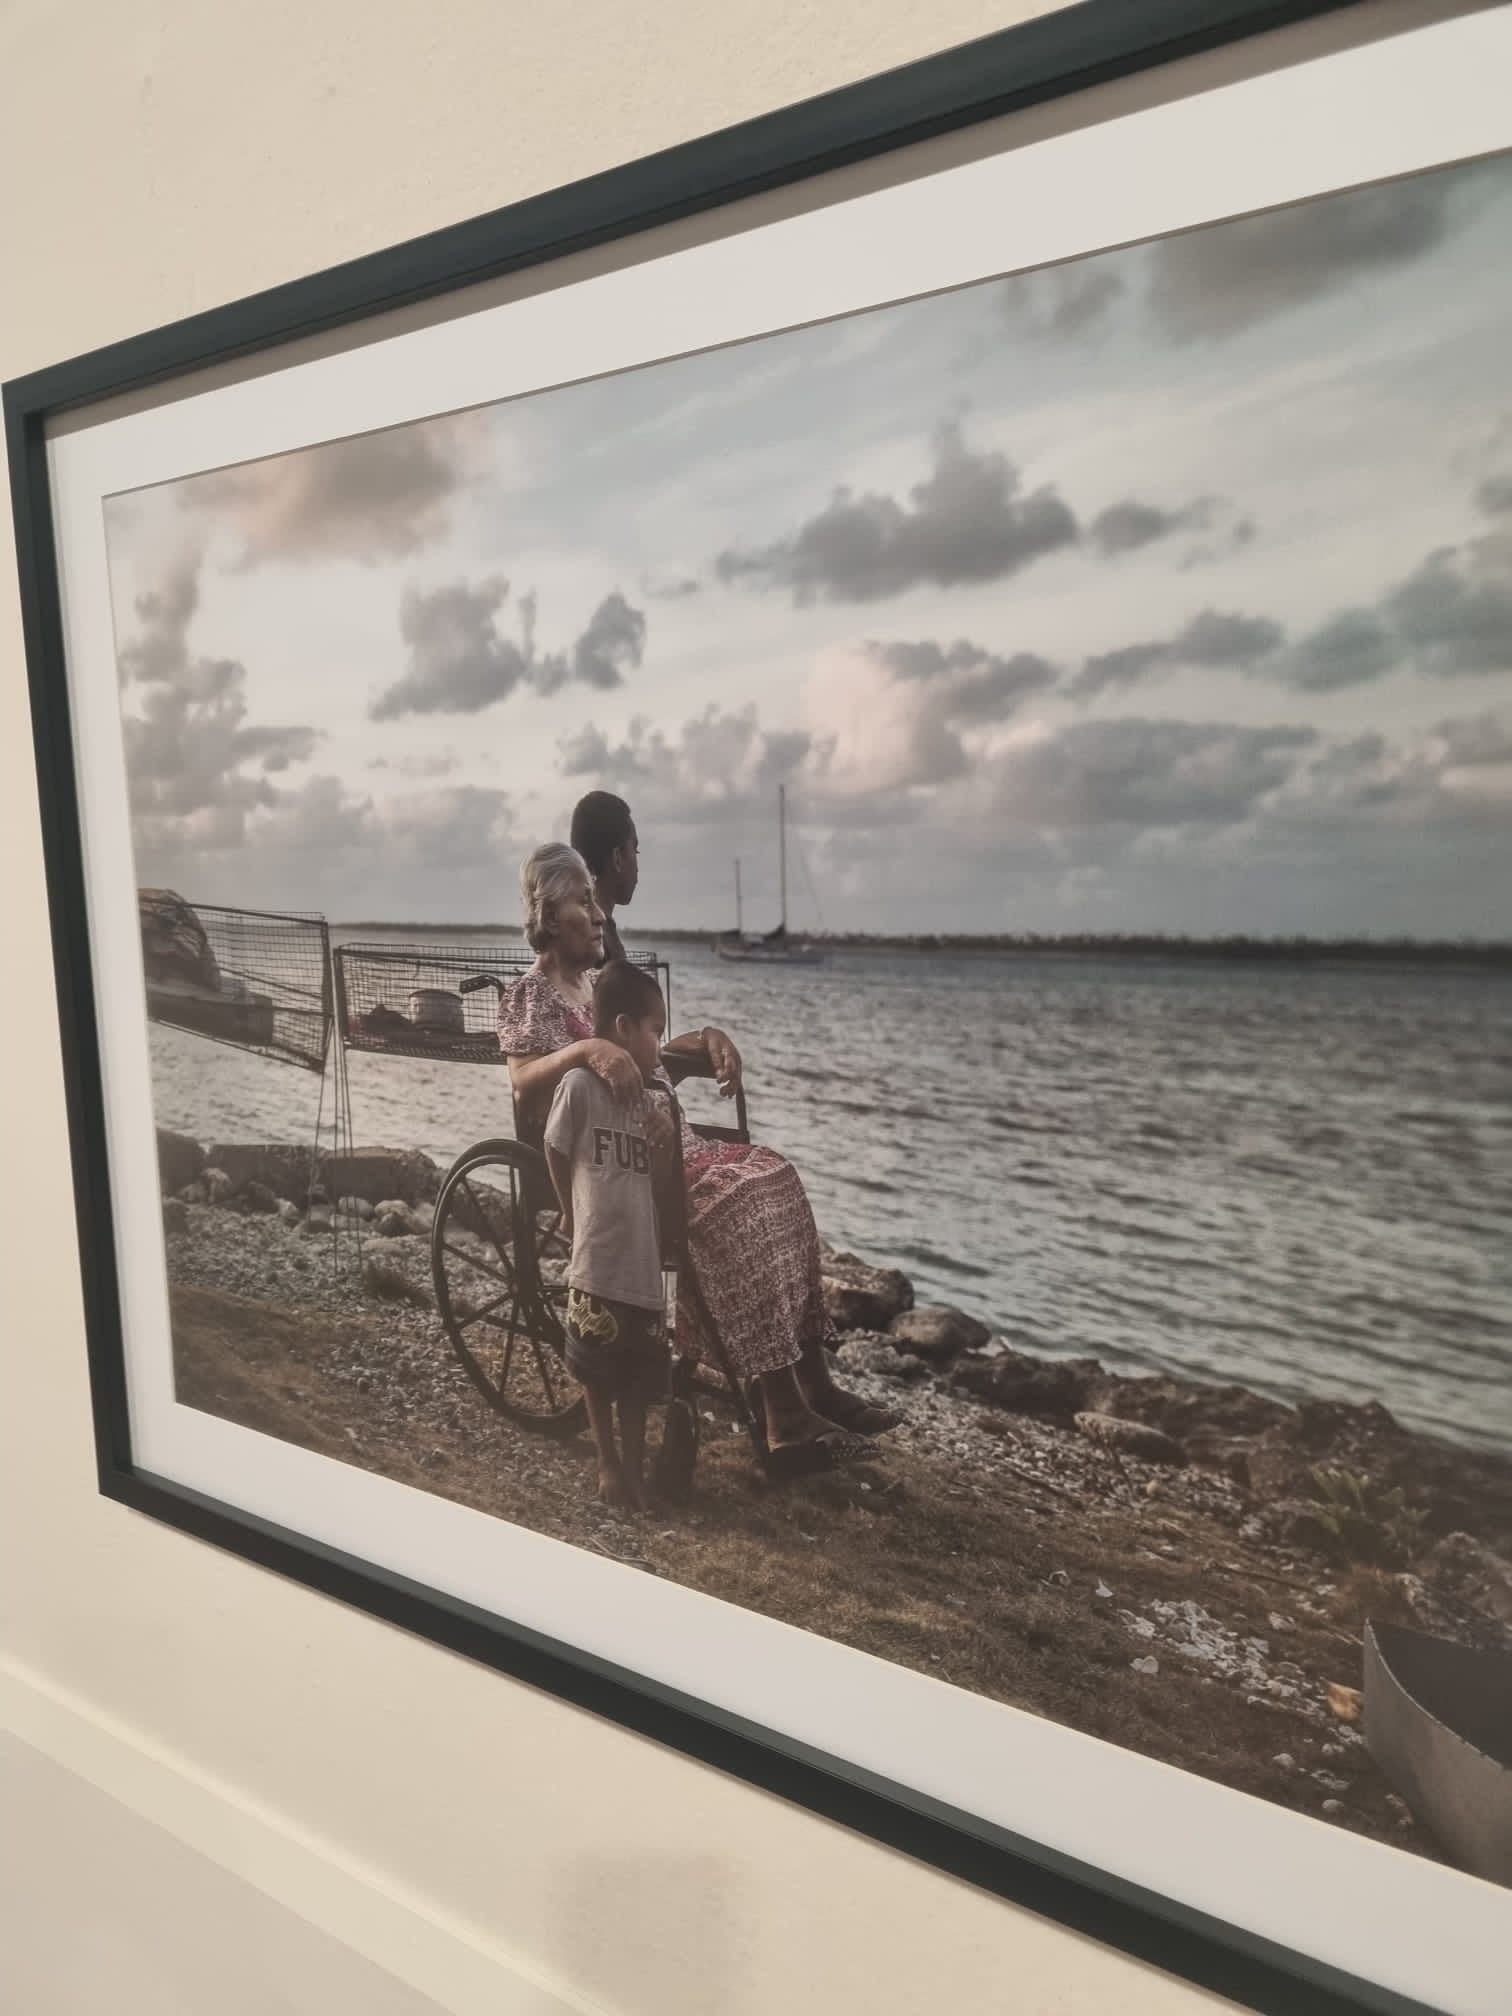 The photo of Theresa de Brun, Tina Stege’s great aunt, and her grandchildren on display inside the Cop28 venue. The image bears witness to the scale of the erosion caused by sea level rise on the remote outer island of Likiep in the Marshall Islands